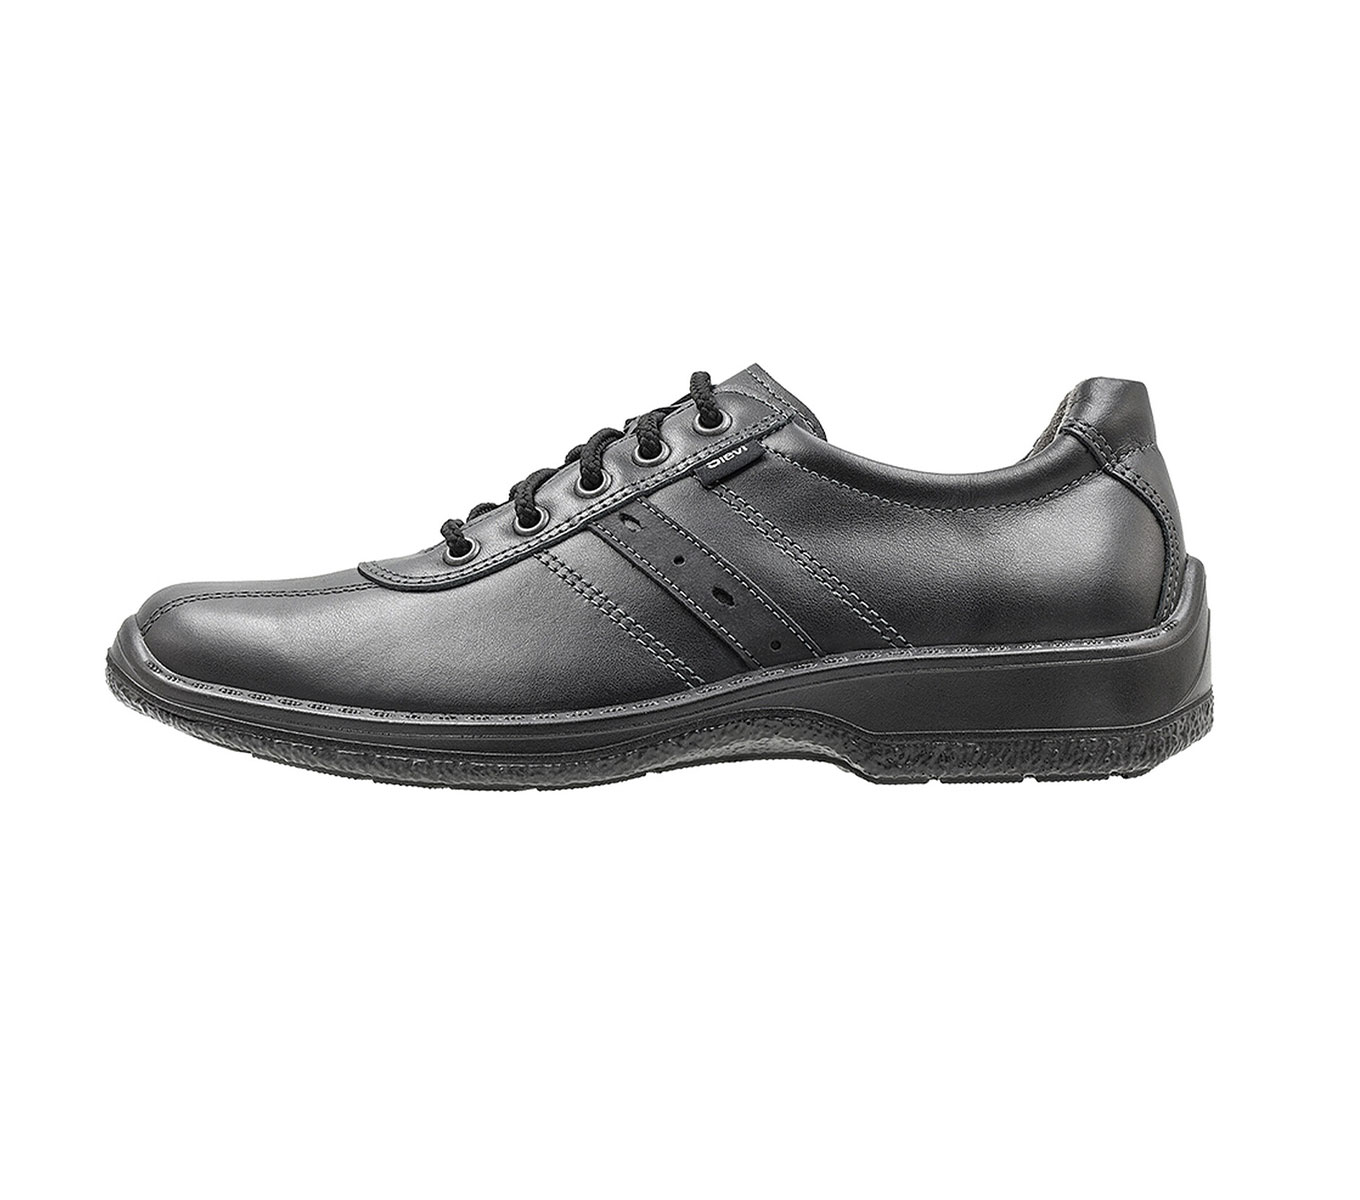 Sievi Street ESD Shoes - Static Safe Environments